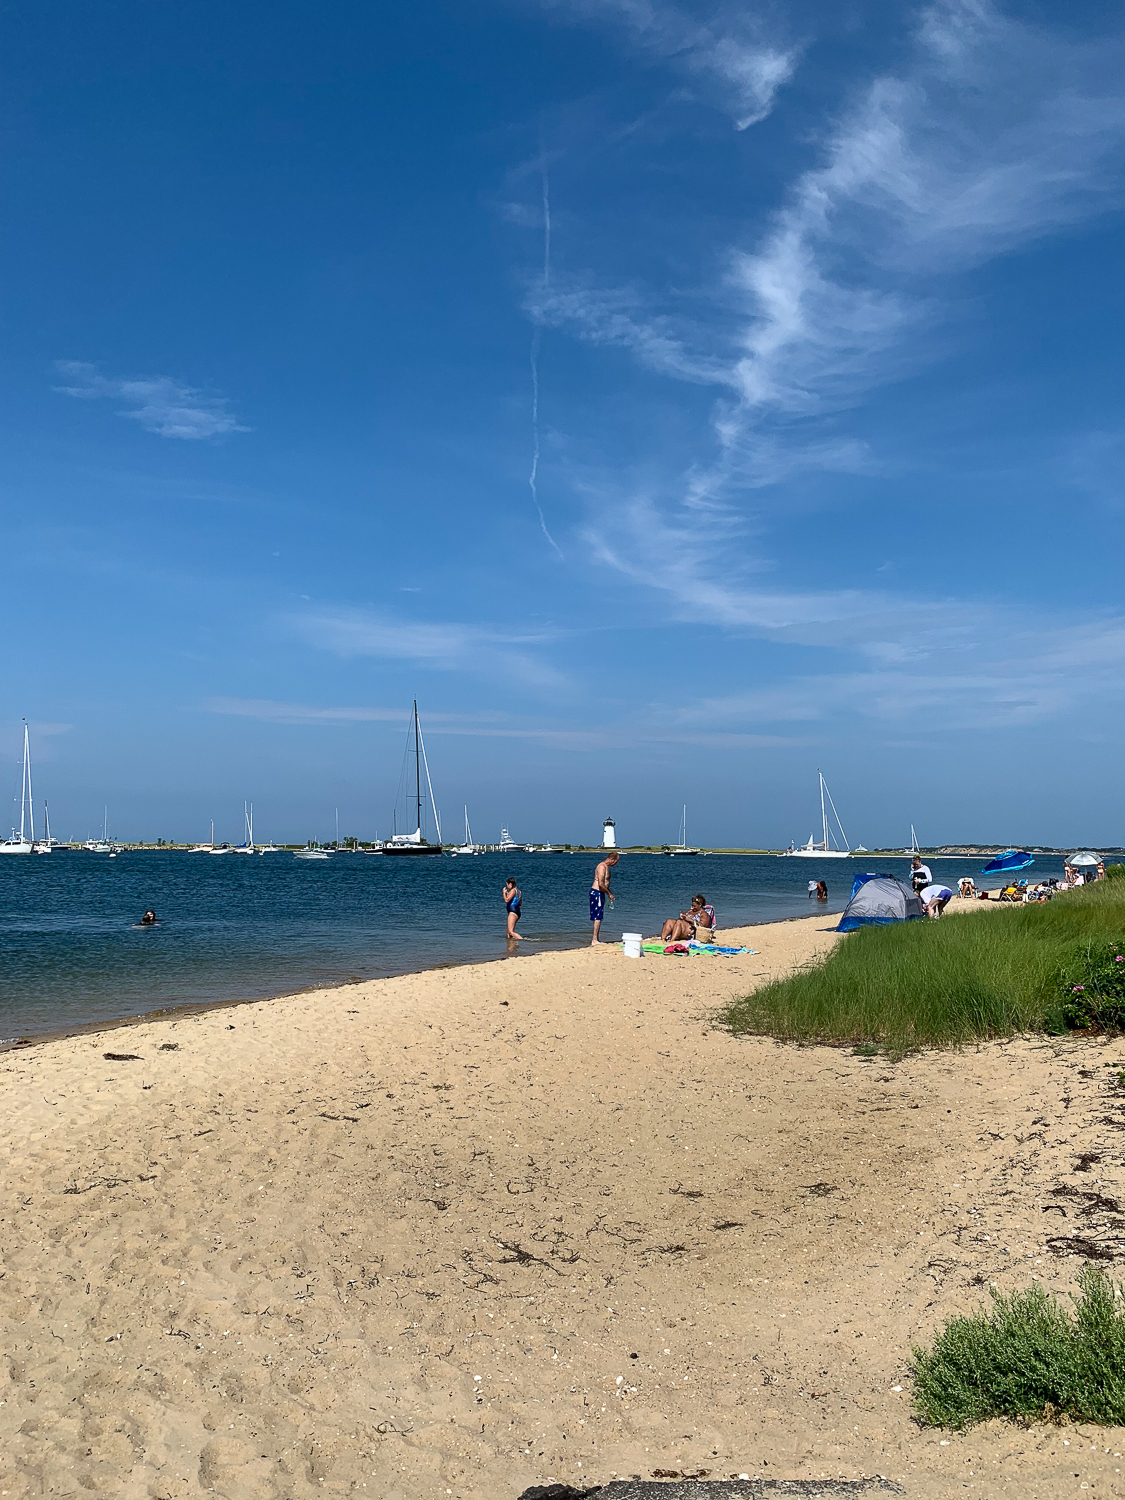 People enjoying the beach with boats in the water